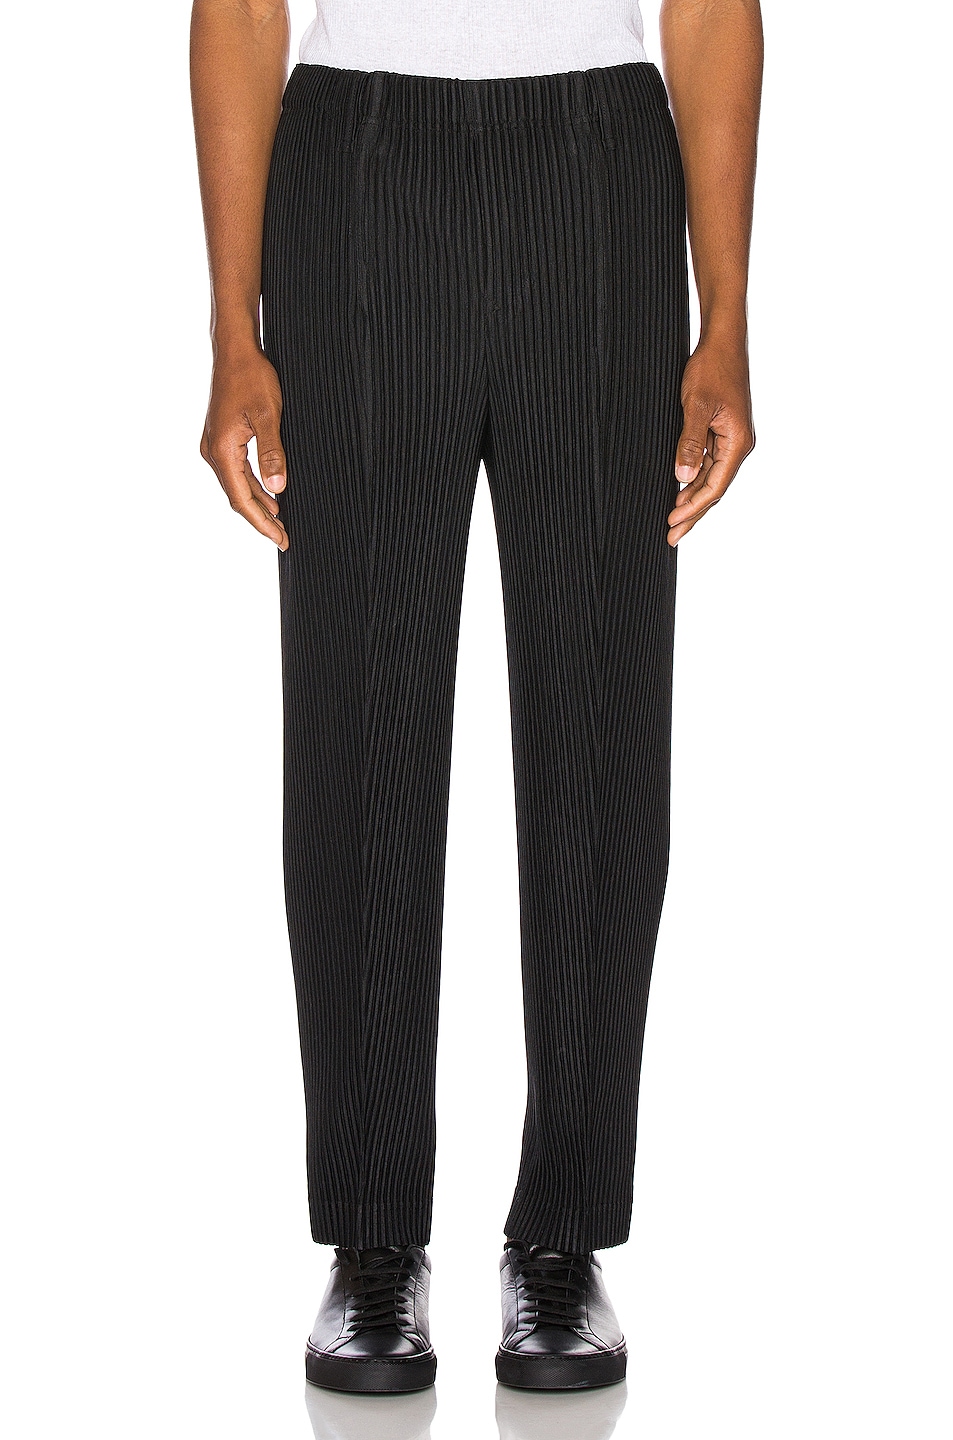 Homme Plisse Issey Miyake Tailored Pleats 2 Trousers in Black | FWRD